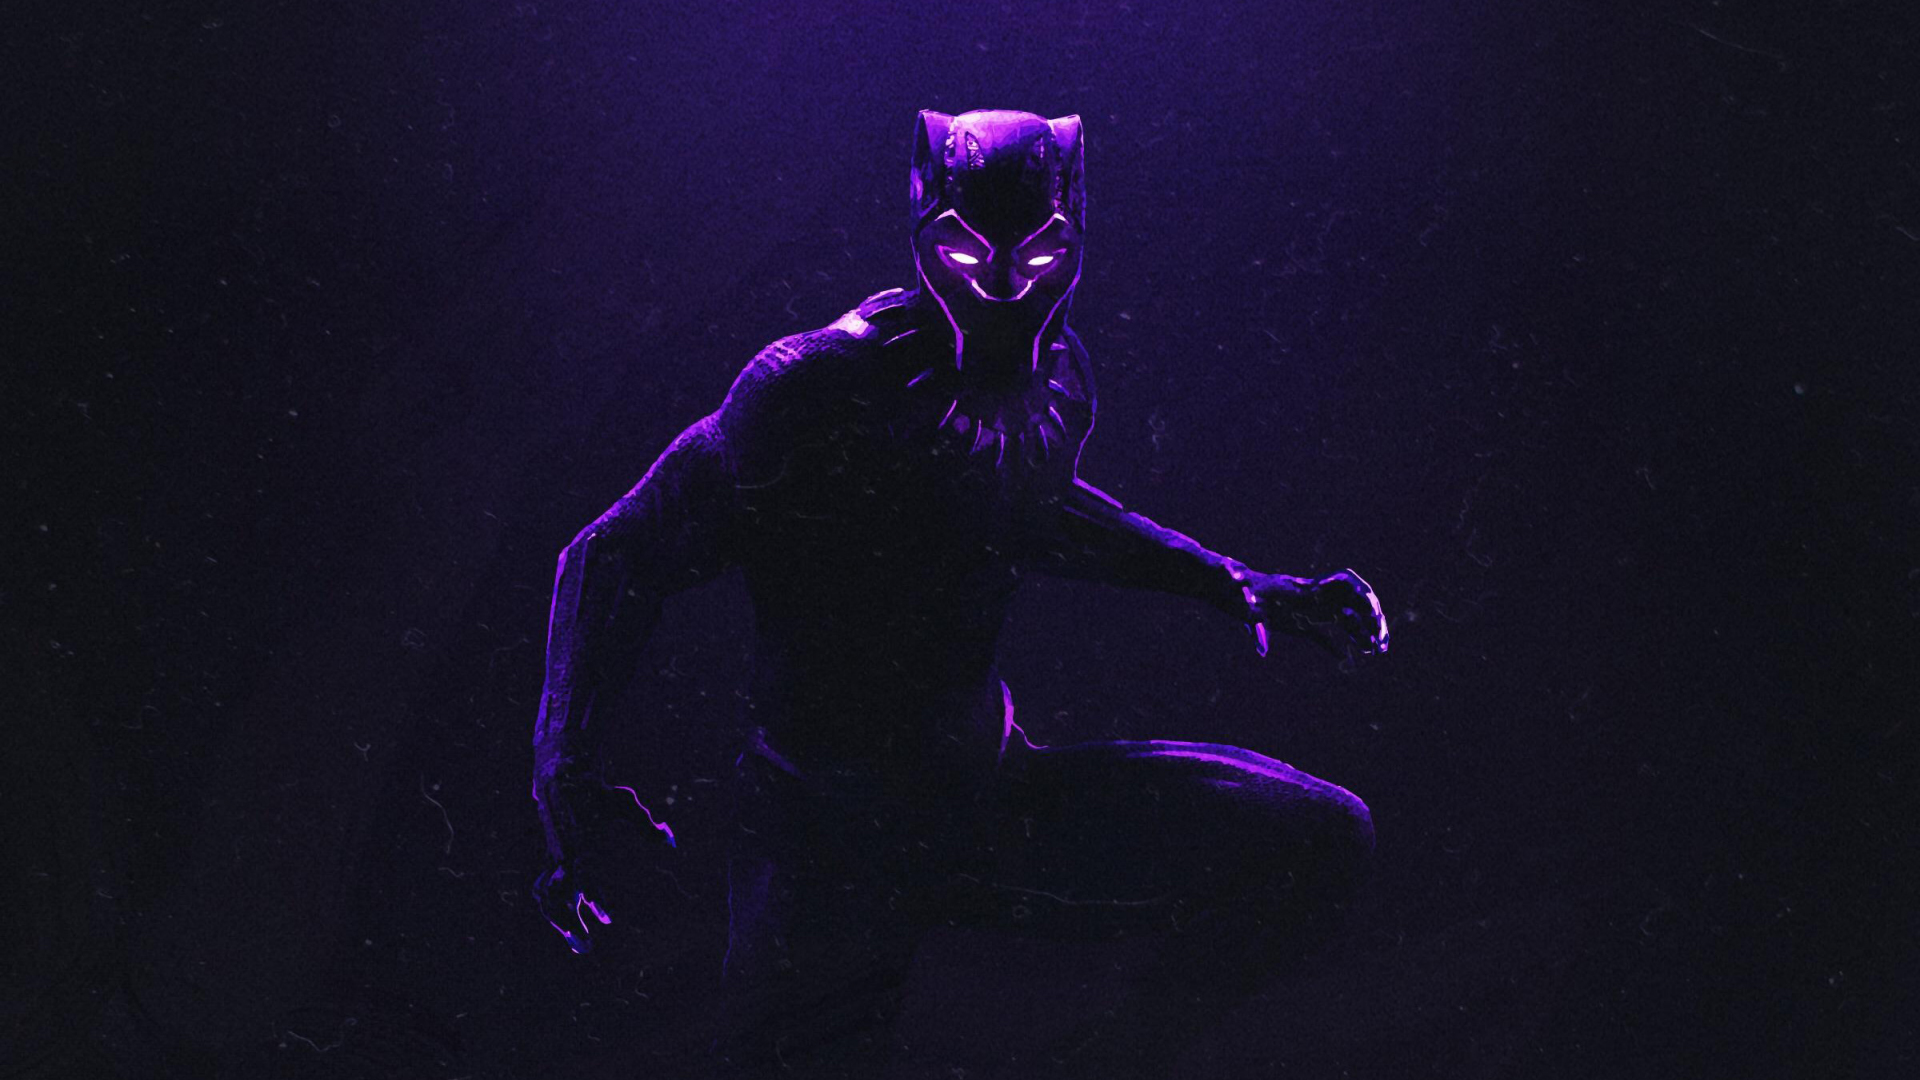 Download 19x1080 Wallpaper Black Panther Dark Glowing Suit Art Full Hd Hdtv Fhd 1080p 19x1080 Hd Image Background 3765